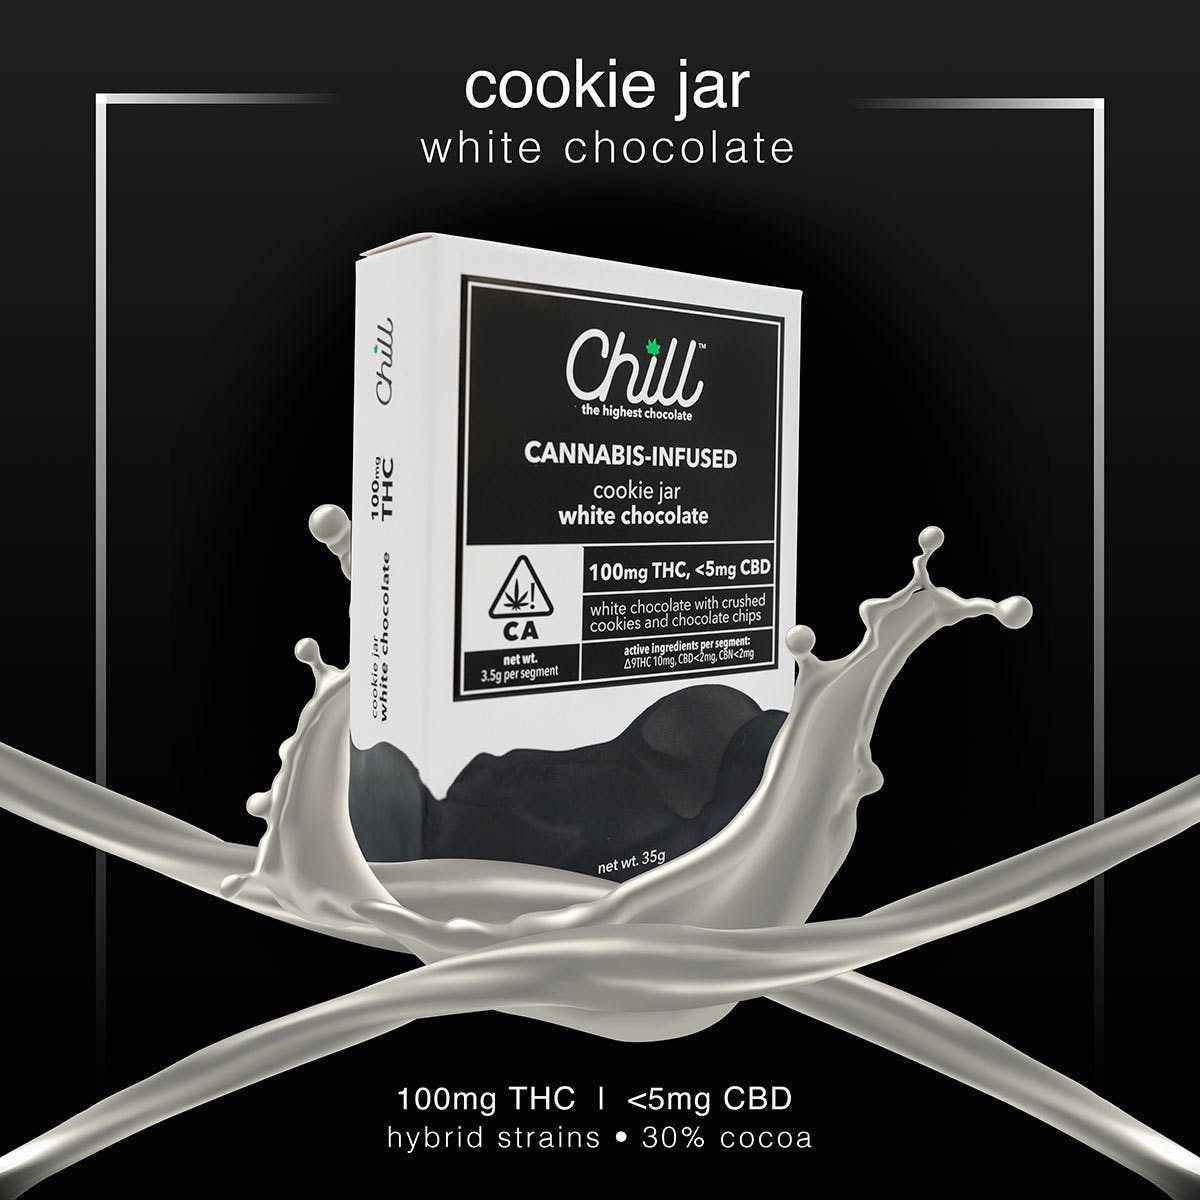 Chill Cannabis Infused Cookie Jar White Chocolate